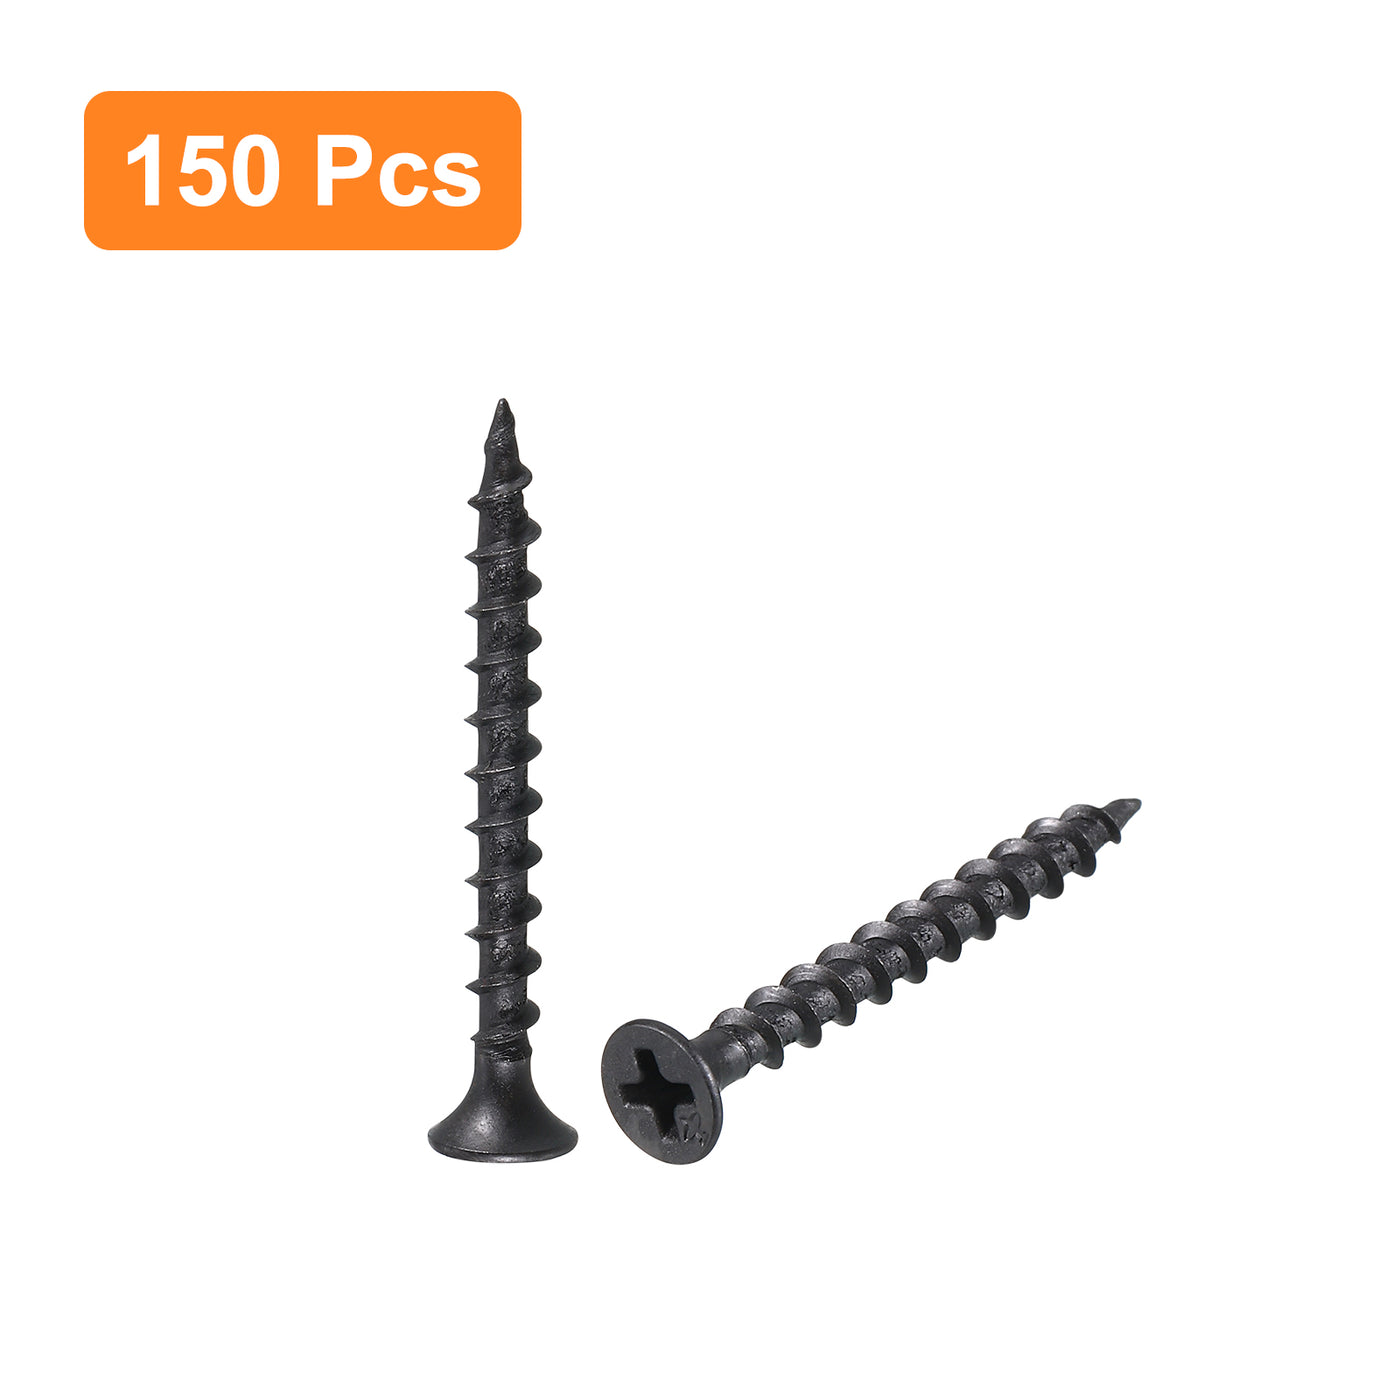 uxcell Uxcell M3.8x40mm 150pcs Phillips Drive Wood Screws, Carbon Steel Self Tapping Screws